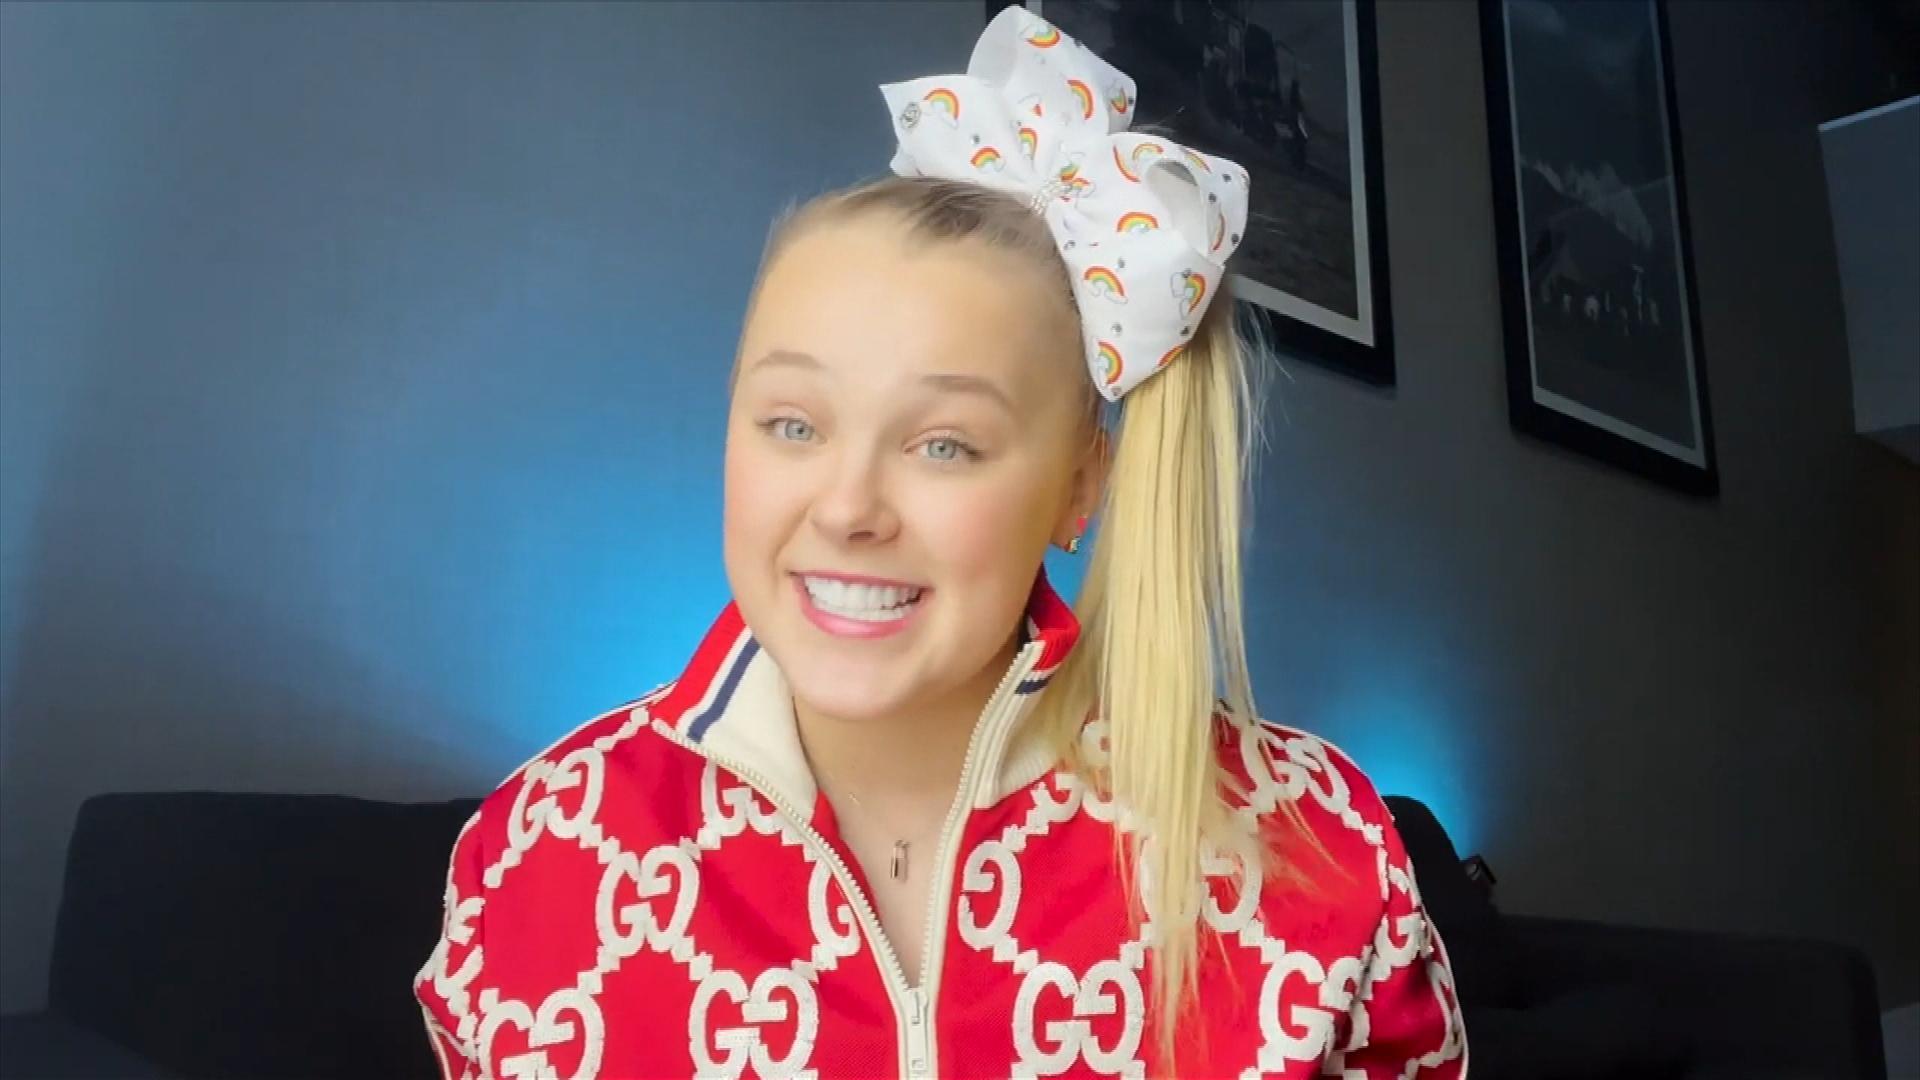 JoJo Siwa Says Kids Around the World Can Look Up to Her After Coming Out